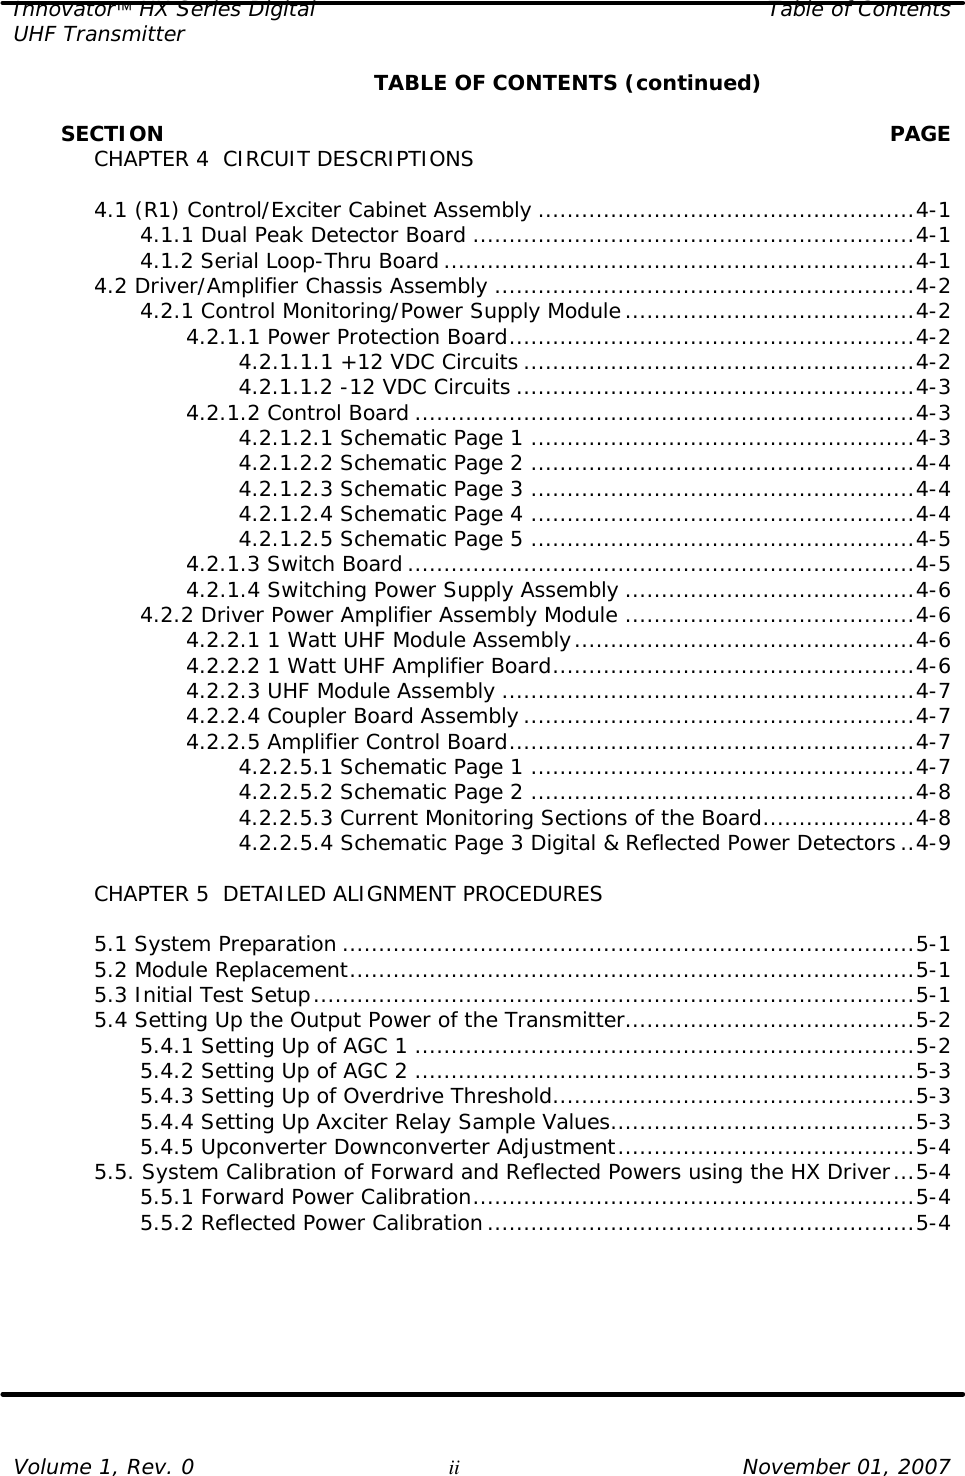 Innovator HX Series Digital Table of Contents UHF Transmitter  Volume 1, Rev. 0 ii November 01, 2007     TABLE OF CONTENTS (continued)         SECTION    PAGE  CHAPTER 4  CIRCUIT DESCRIPTIONS   4.1 (R1) Control/Exciter Cabinet Assembly ....................................................4-1     4.1.1 Dual Peak Detector Board .............................................................4-1     4.1.2 Serial Loop-Thru Board .................................................................4-1  4.2 Driver/Amplifier Chassis Assembly ..........................................................4-2     4.2.1 Control Monitoring/Power Supply Module........................................4-2     4.2.1.1 Power Protection Board........................................................4-2         4.2.1.1.1 +12 VDC Circuits ......................................................4-2         4.2.1.1.2 -12 VDC Circuits .......................................................4-3     4.2.1.2 Control Board .....................................................................4-3         4.2.1.2.1 Schematic Page 1 .....................................................4-3         4.2.1.2.2 Schematic Page 2 .....................................................4-4         4.2.1.2.3 Schematic Page 3 .....................................................4-4         4.2.1.2.4 Schematic Page 4 .....................................................4-4         4.2.1.2.5 Schematic Page 5 .....................................................4-5     4.2.1.3 Switch Board ......................................................................4-5     4.2.1.4 Switching Power Supply Assembly ........................................4-6     4.2.2 Driver Power Amplifier Assembly Module ........................................4-6     4.2.2.1 1 Watt UHF Module Assembly...............................................4-6     4.2.2.2 1 Watt UHF Amplifier Board..................................................4-6     4.2.2.3 UHF Module Assembly .........................................................4-7     4.2.2.4 Coupler Board Assembly ......................................................4-7     4.2.2.5 Amplifier Control Board........................................................4-7         4.2.2.5.1 Schematic Page 1 .....................................................4-7         4.2.2.5.2 Schematic Page 2 .....................................................4-8         4.2.2.5.3 Current Monitoring Sections of the Board.....................4-8         4.2.2.5.4 Schematic Page 3 Digital &amp; Reflected Power Detectors ..4-9   CHAPTER 5  DETAILED ALIGNMENT PROCEDURES   5.1 System Preparation ...............................................................................5-1  5.2 Module Replacement..............................................................................5-1  5.3 Initial Test Setup...................................................................................5-1  5.4 Setting Up the Output Power of the Transmitter........................................5-2     5.4.1 Setting Up of AGC 1 .....................................................................5-2     5.4.2 Setting Up of AGC 2 .....................................................................5-3     5.4.3 Setting Up of Overdrive Threshold..................................................5-3     5.4.4 Setting Up Axciter Relay Sample Values..........................................5-3     5.4.5 Upconverter Downconverter Adjustment.........................................5-4  5.5. System Calibration of Forward and Reflected Powers using the HX Driver...5-4     5.5.1 Forward Power Calibration.............................................................5-4     5.5.2 Reflected Power Calibration...........................................................5-4  